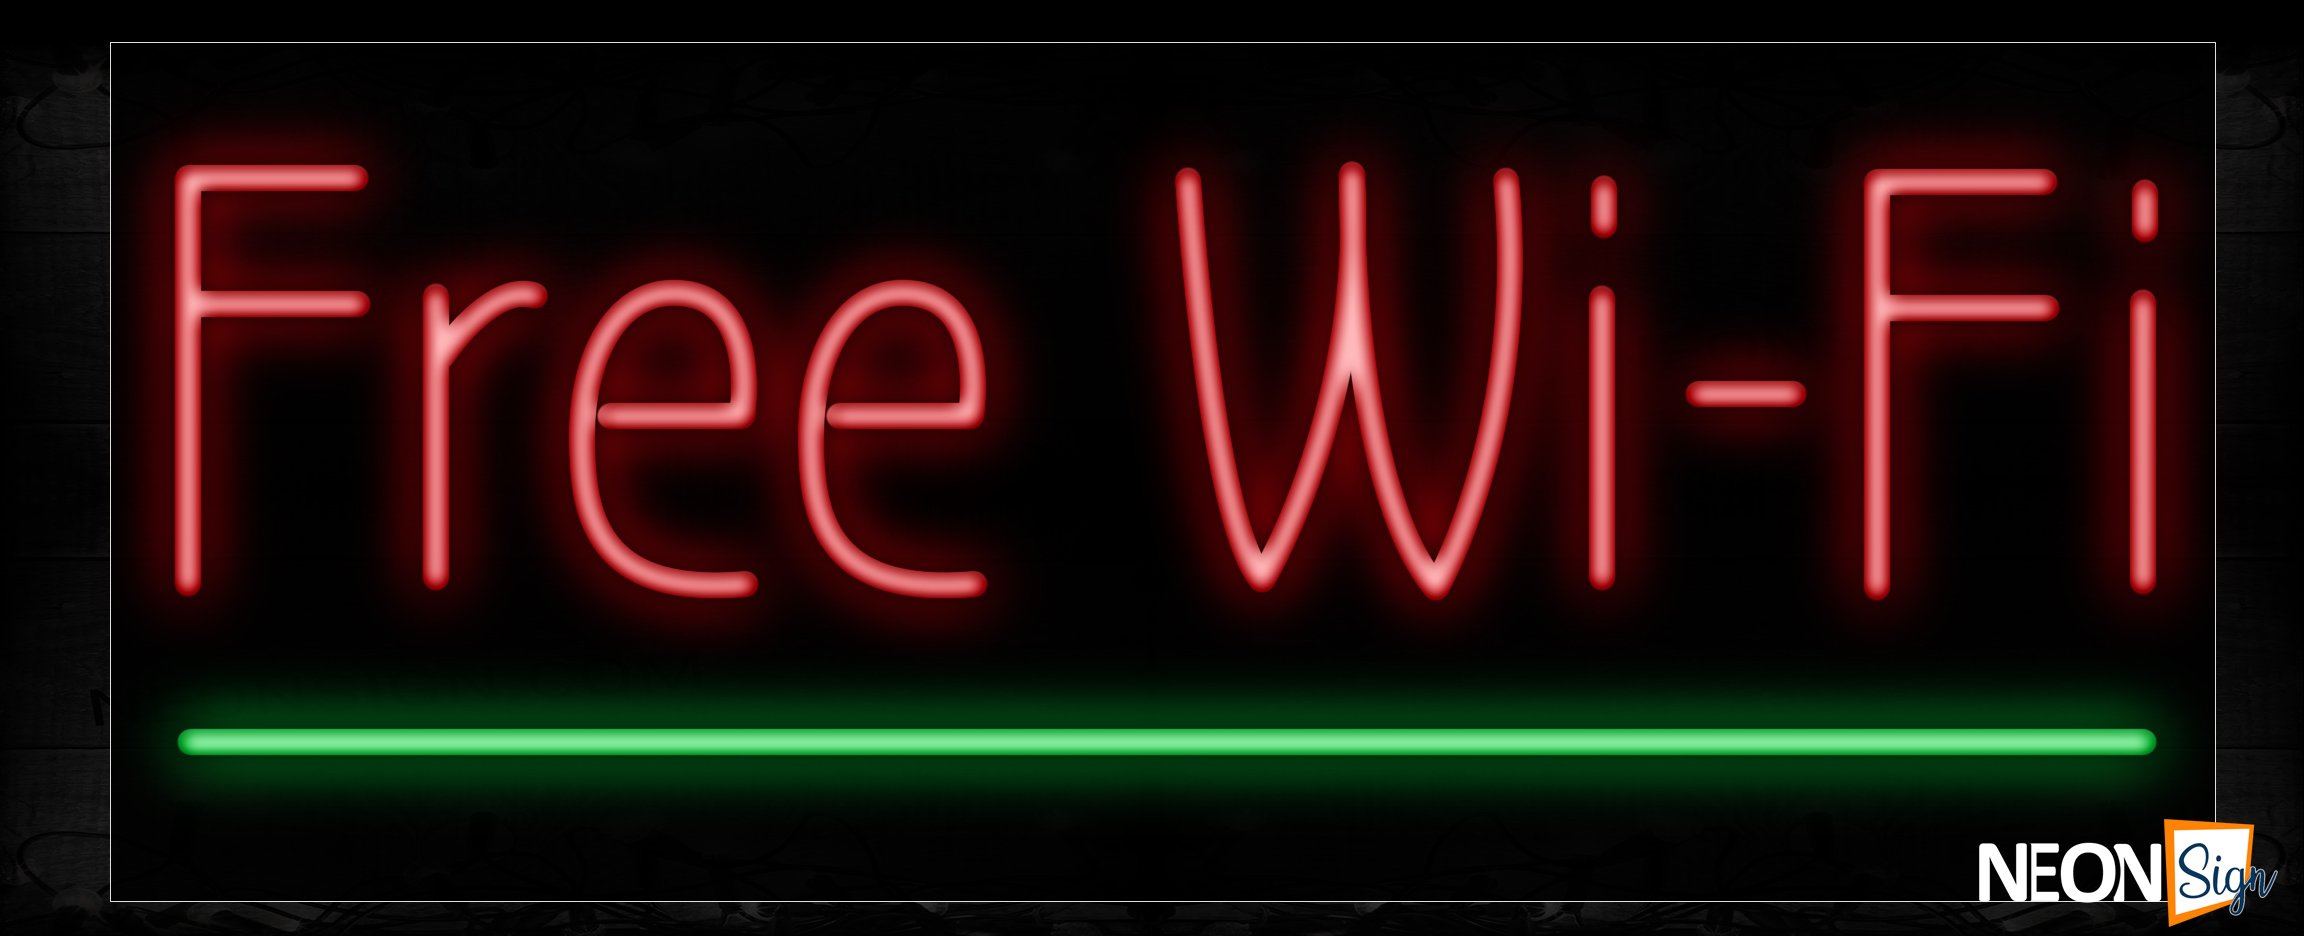 Image of 11406 Free Wifi With Green Underline On Bottom Traditional Neon_13x32 Black Backing